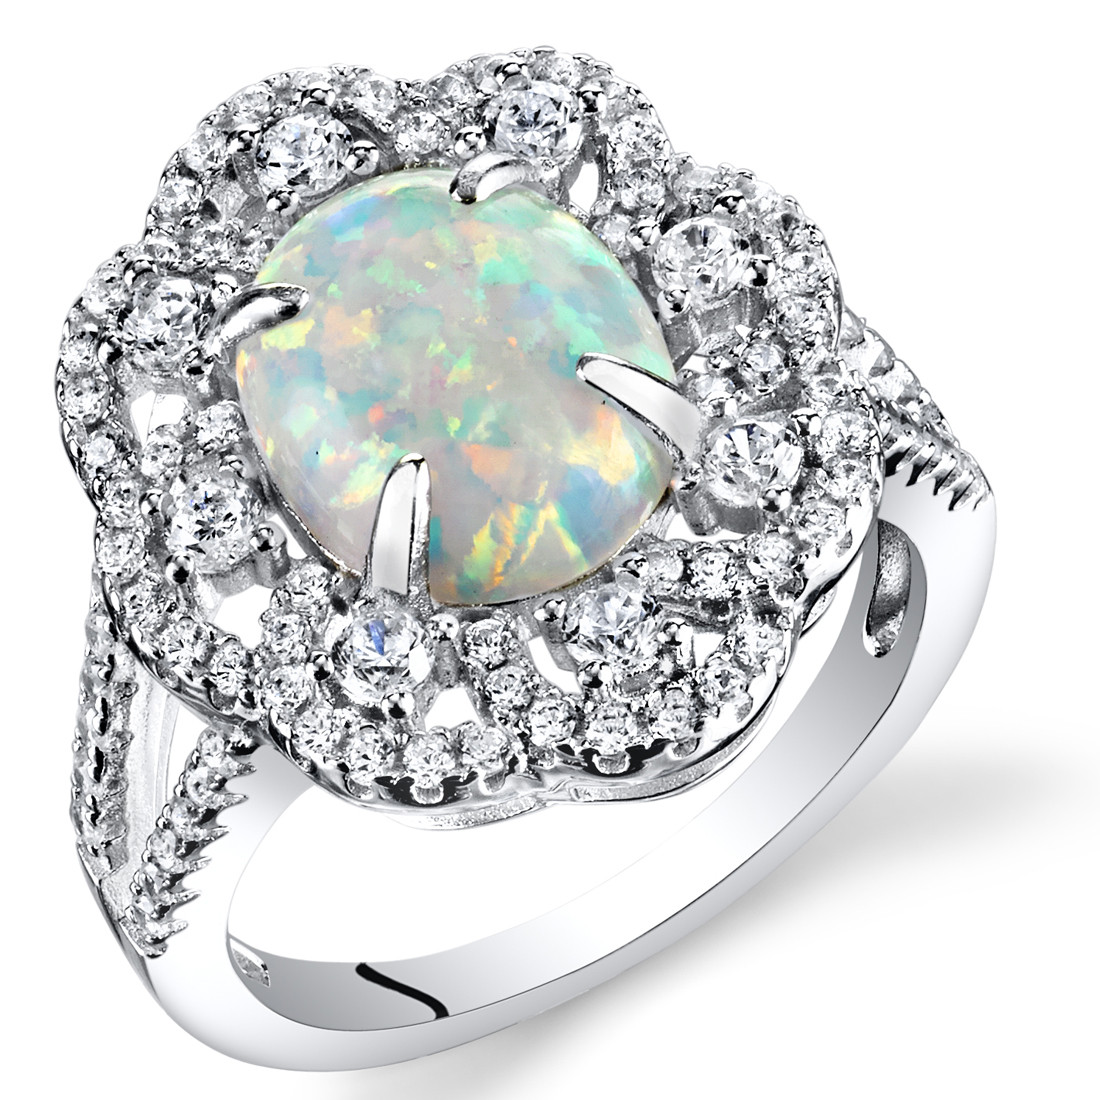 Created Opal Victorian Ring Sterling Silver Oval Cabochon 1.25 Carats ...